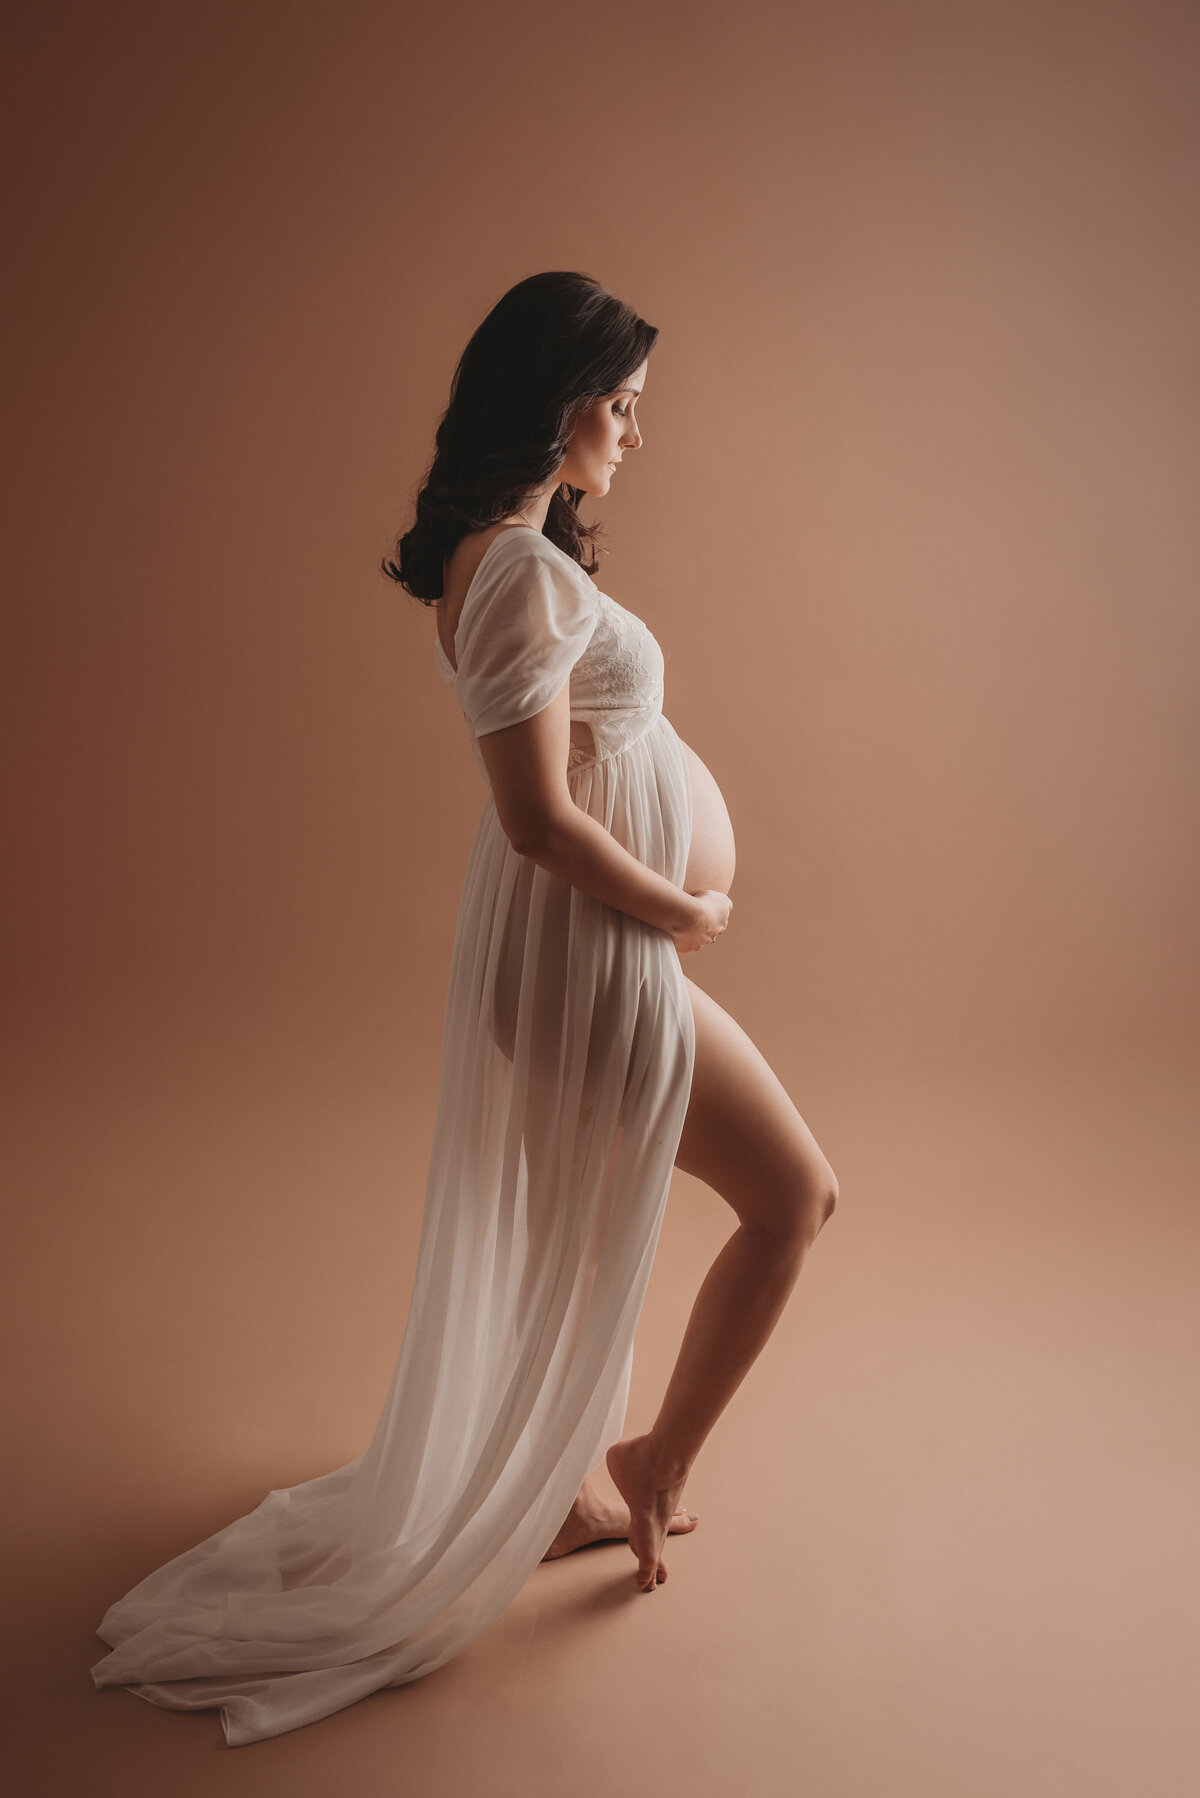 Pregnancy portrait on tan backdrop with 36 week pregnant woman holding baby bump looking at baby bump and wearing sheer white maternity gown open on tummy